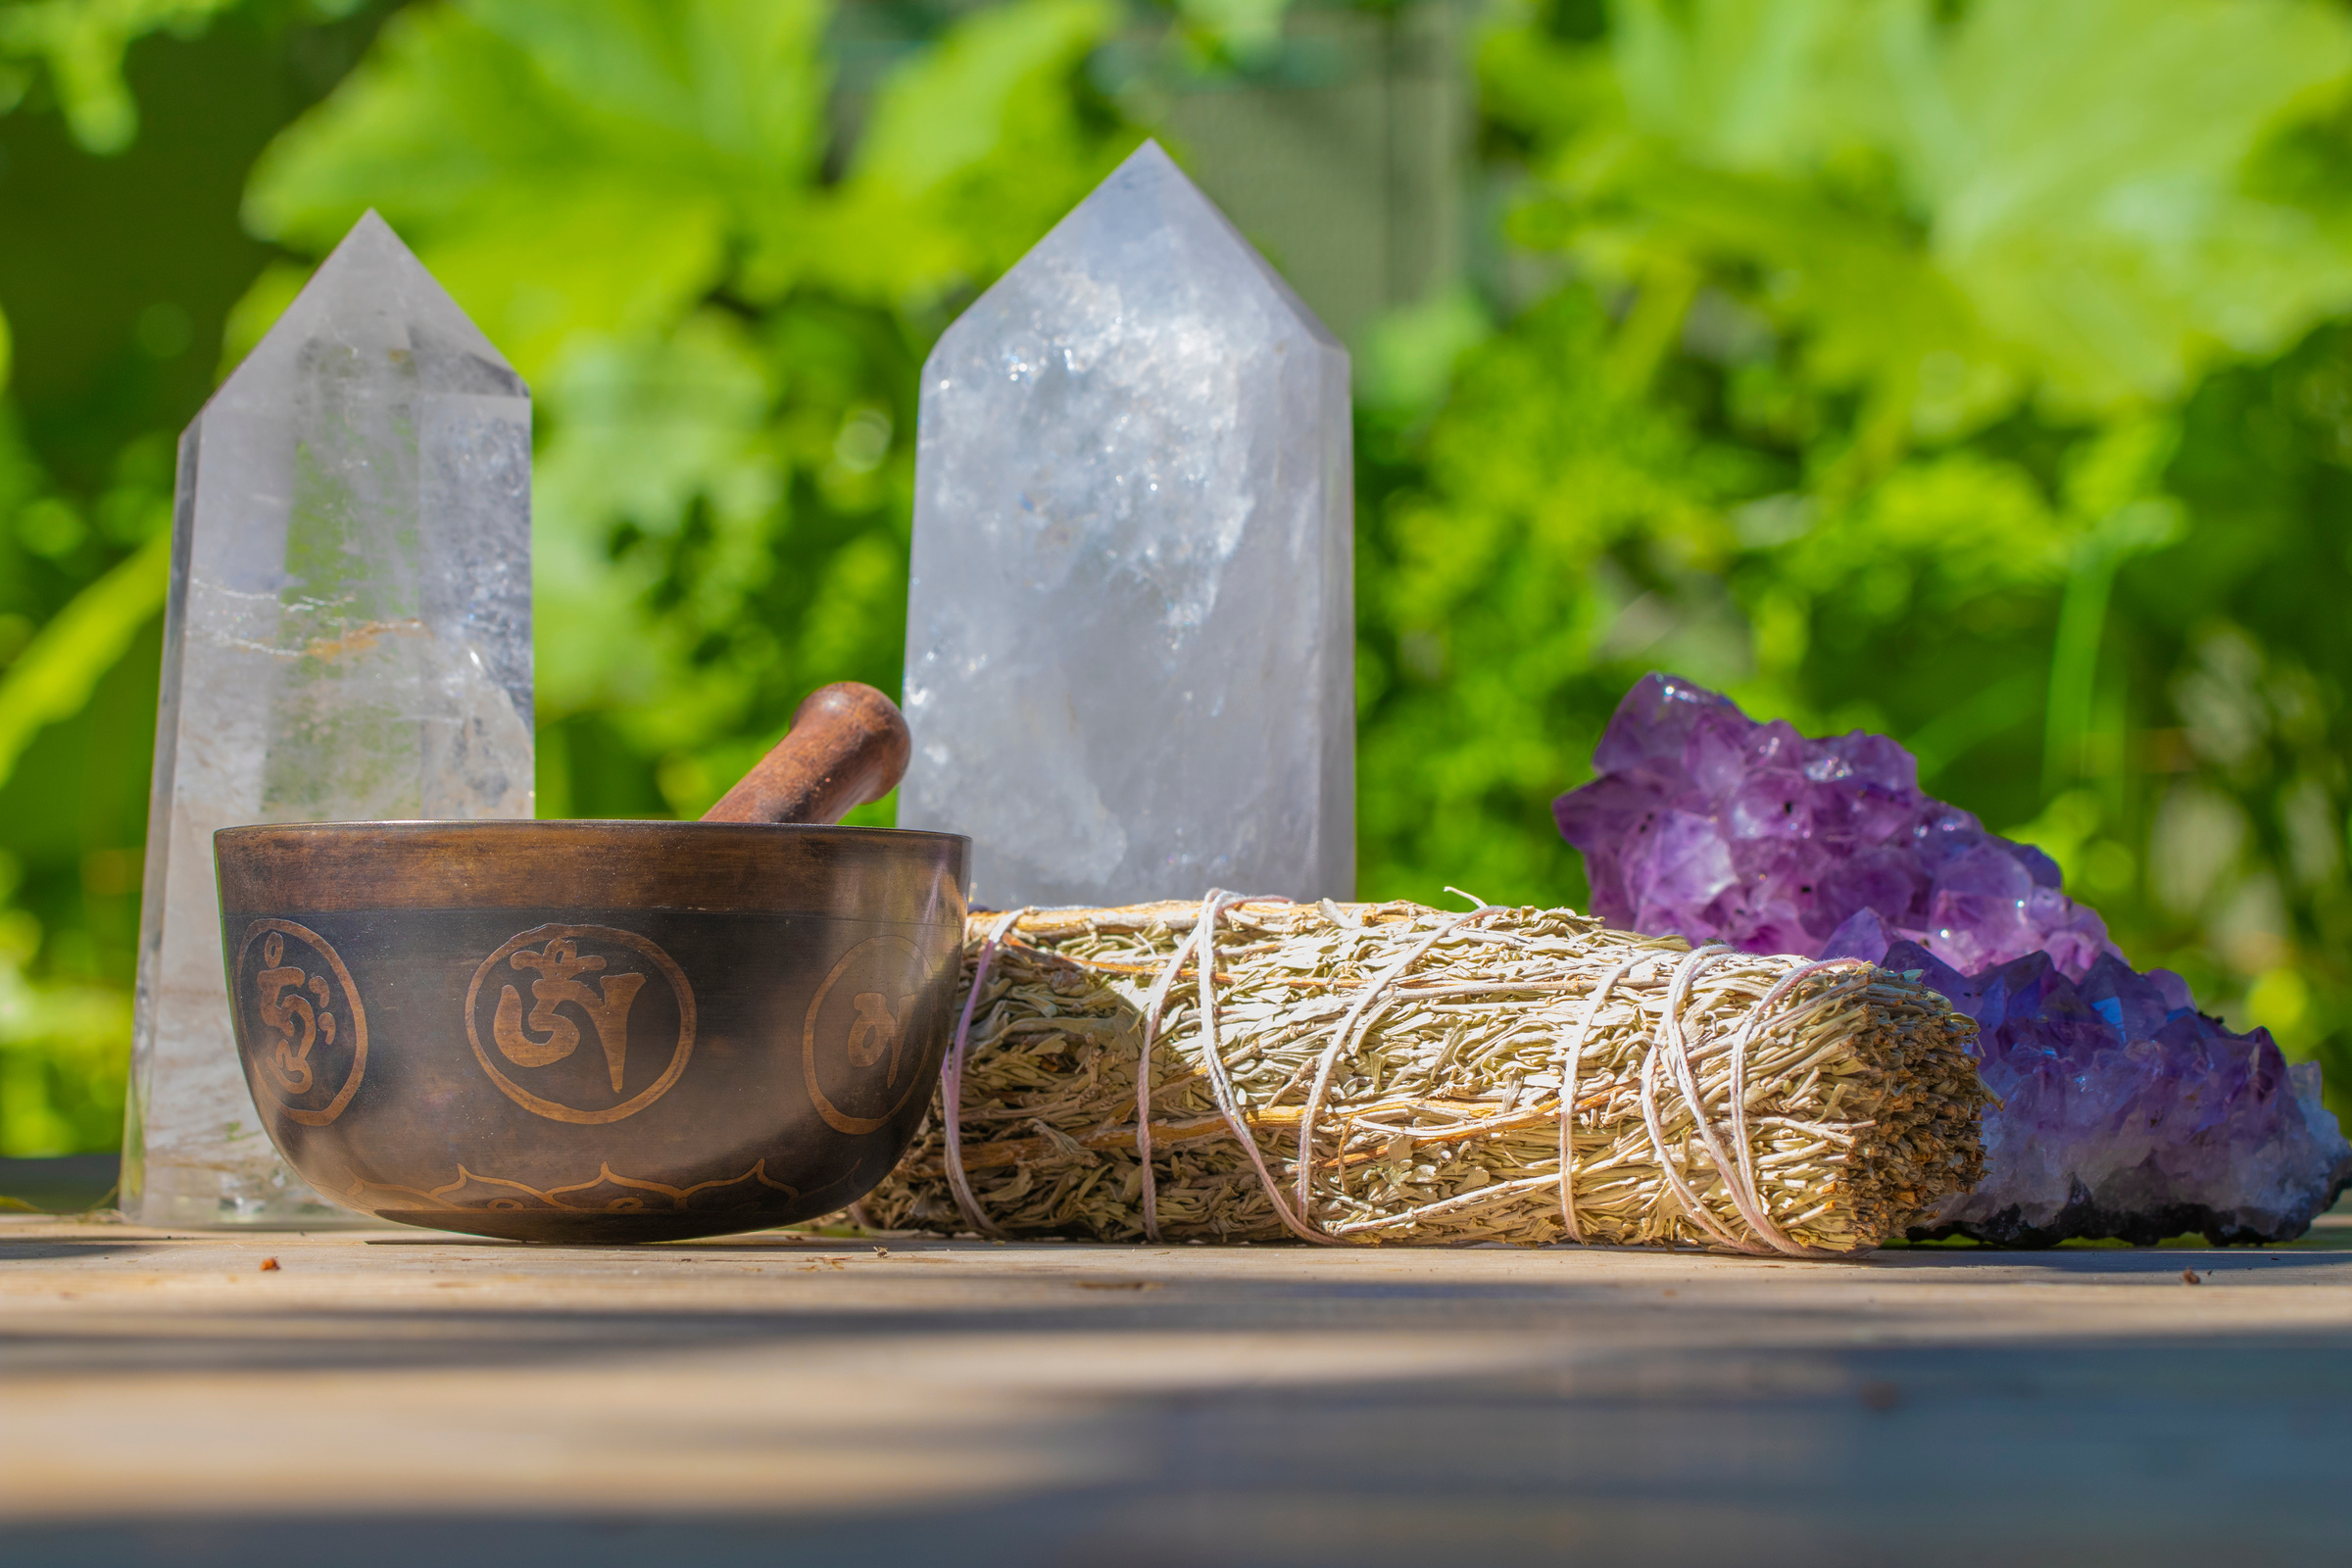 A Beautiful Tibetan Singing Bowl with Sage and several Crystals